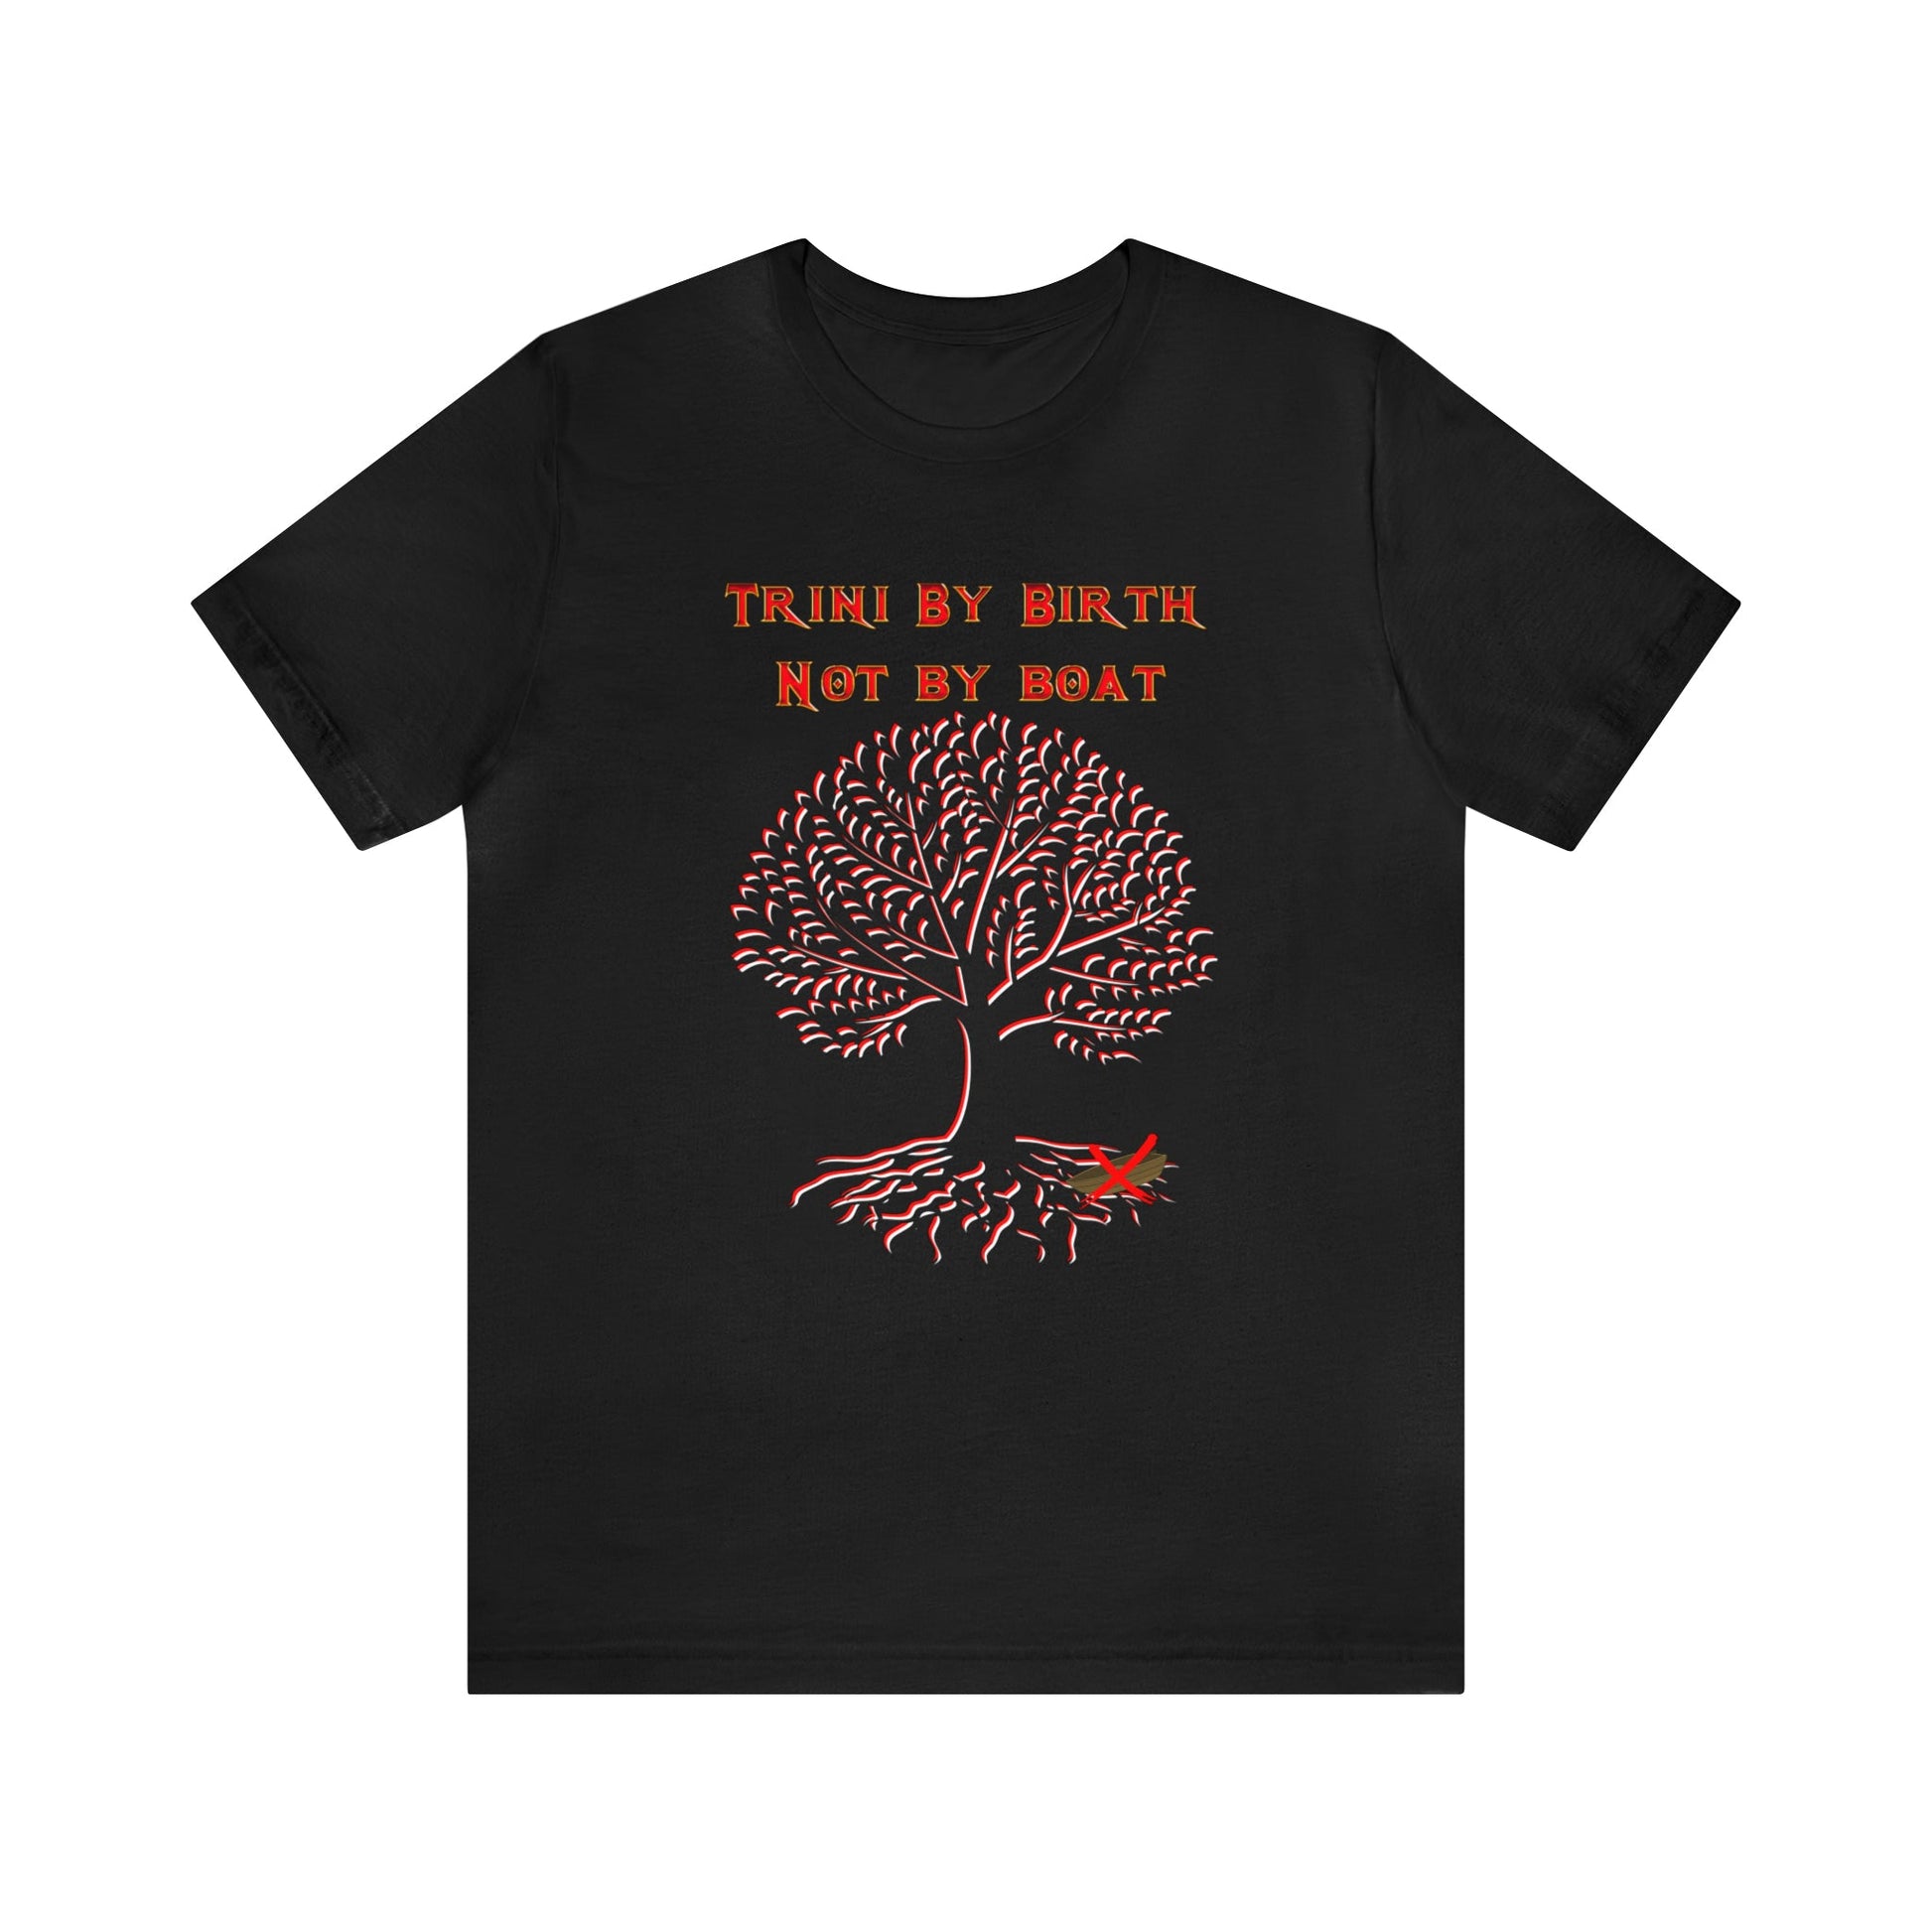 TRINI BY BIRTH NOT BY BOAT HERITAGE T-SHIRT-T-Shirt-Black-S-mysticalcherry